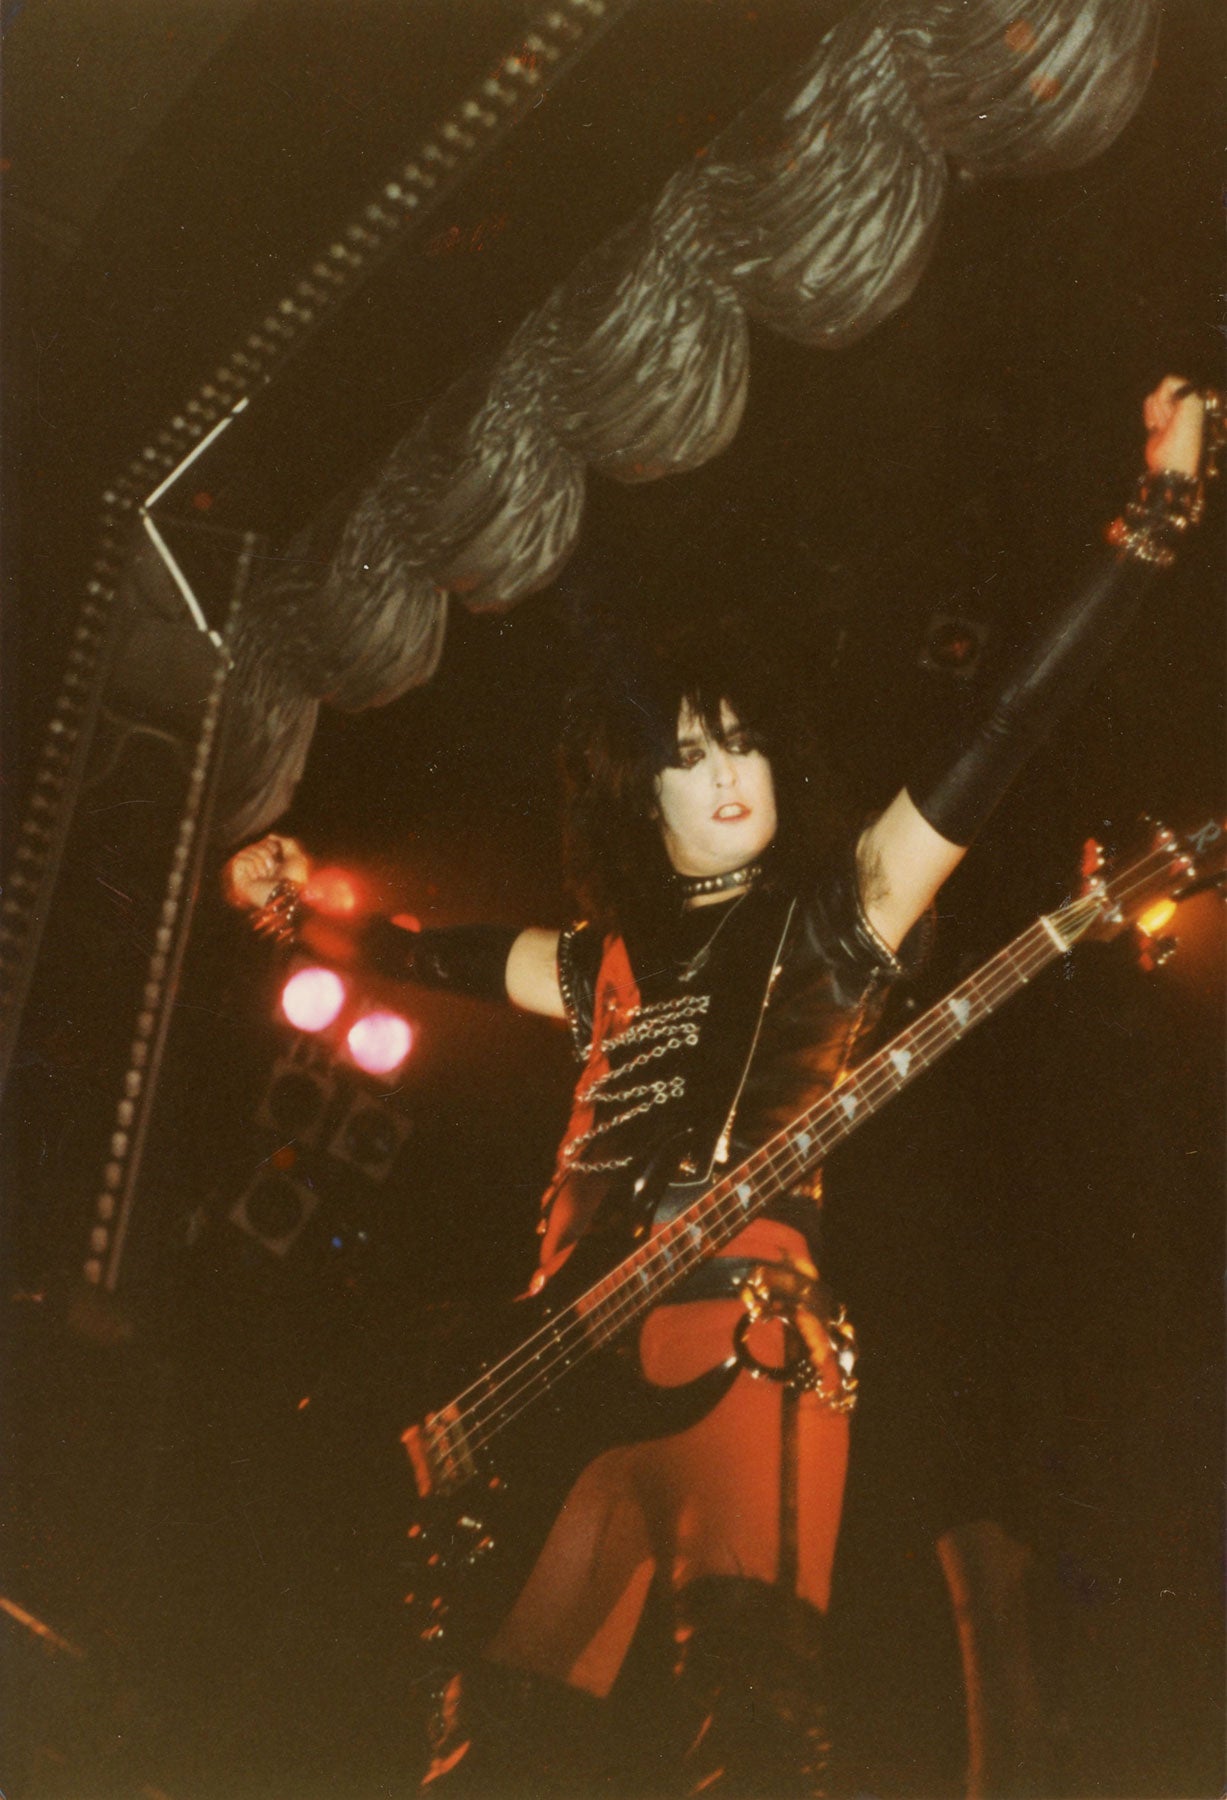 Nikki Sixx blesses the audience during the Shout At The Devil Tour circa 1983